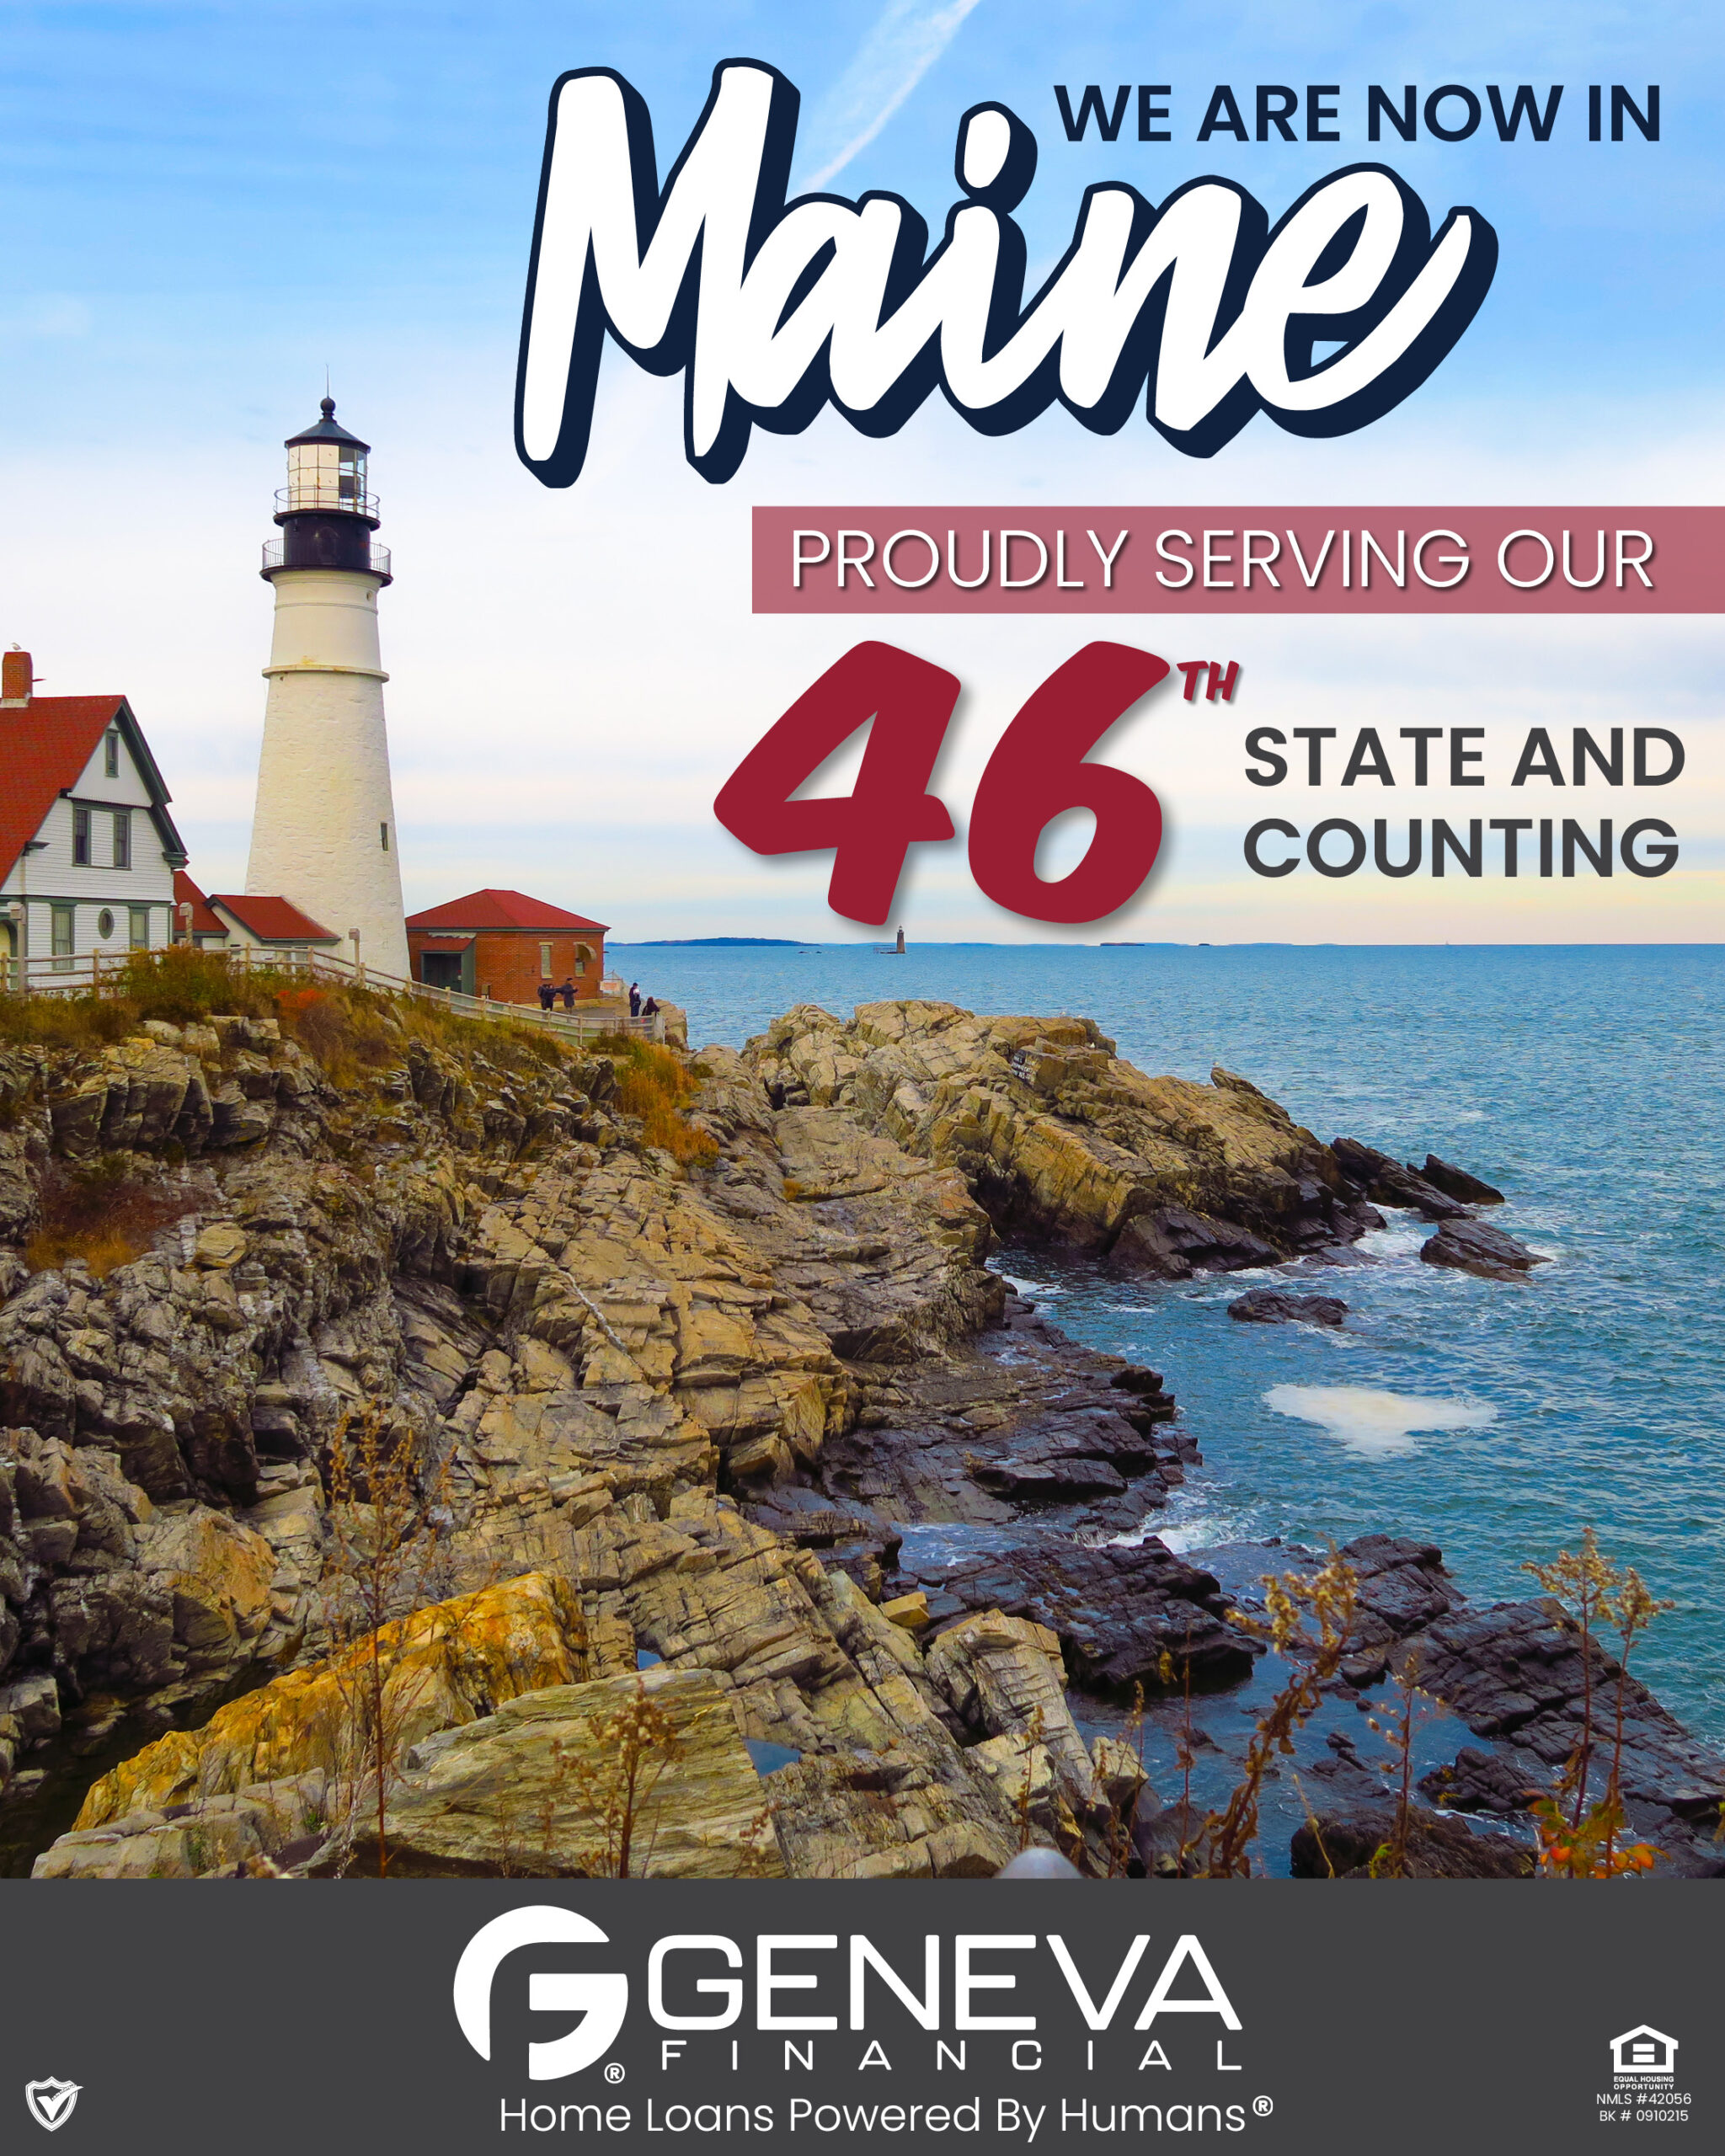 Geneva Financial has announced its 46th state licensure; Opens for business and jobs in Maine, the third addition to Geneva’s operations in 2021.